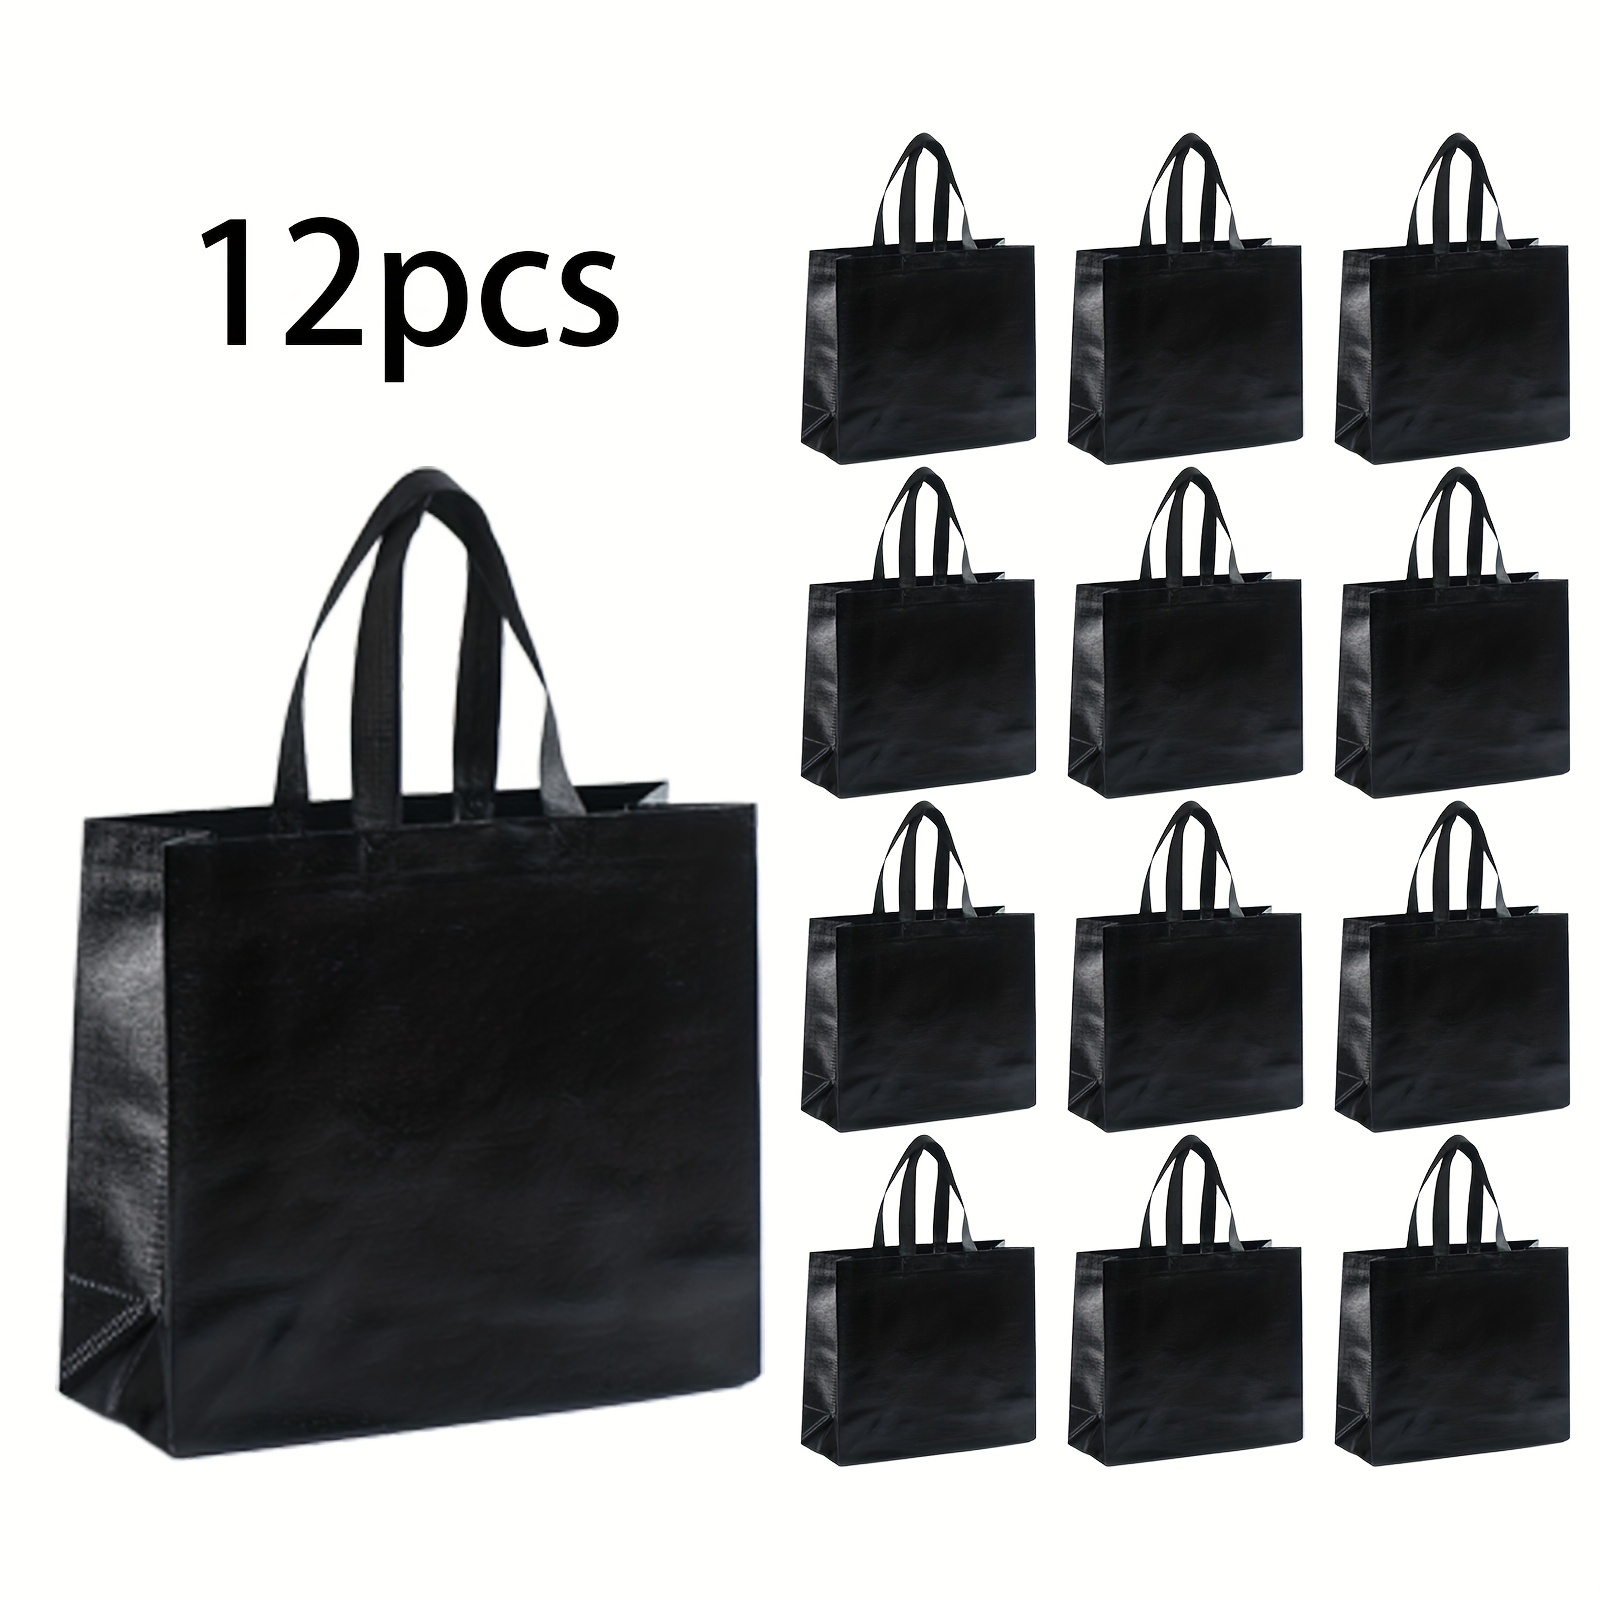 Gadpiparty Storage Bag Organizer 12Pcs Glossy Reusable Grocery Bags Tote  Bags with Handle Present Bag Gift Bag for Wedding Bridal Shower Engagement